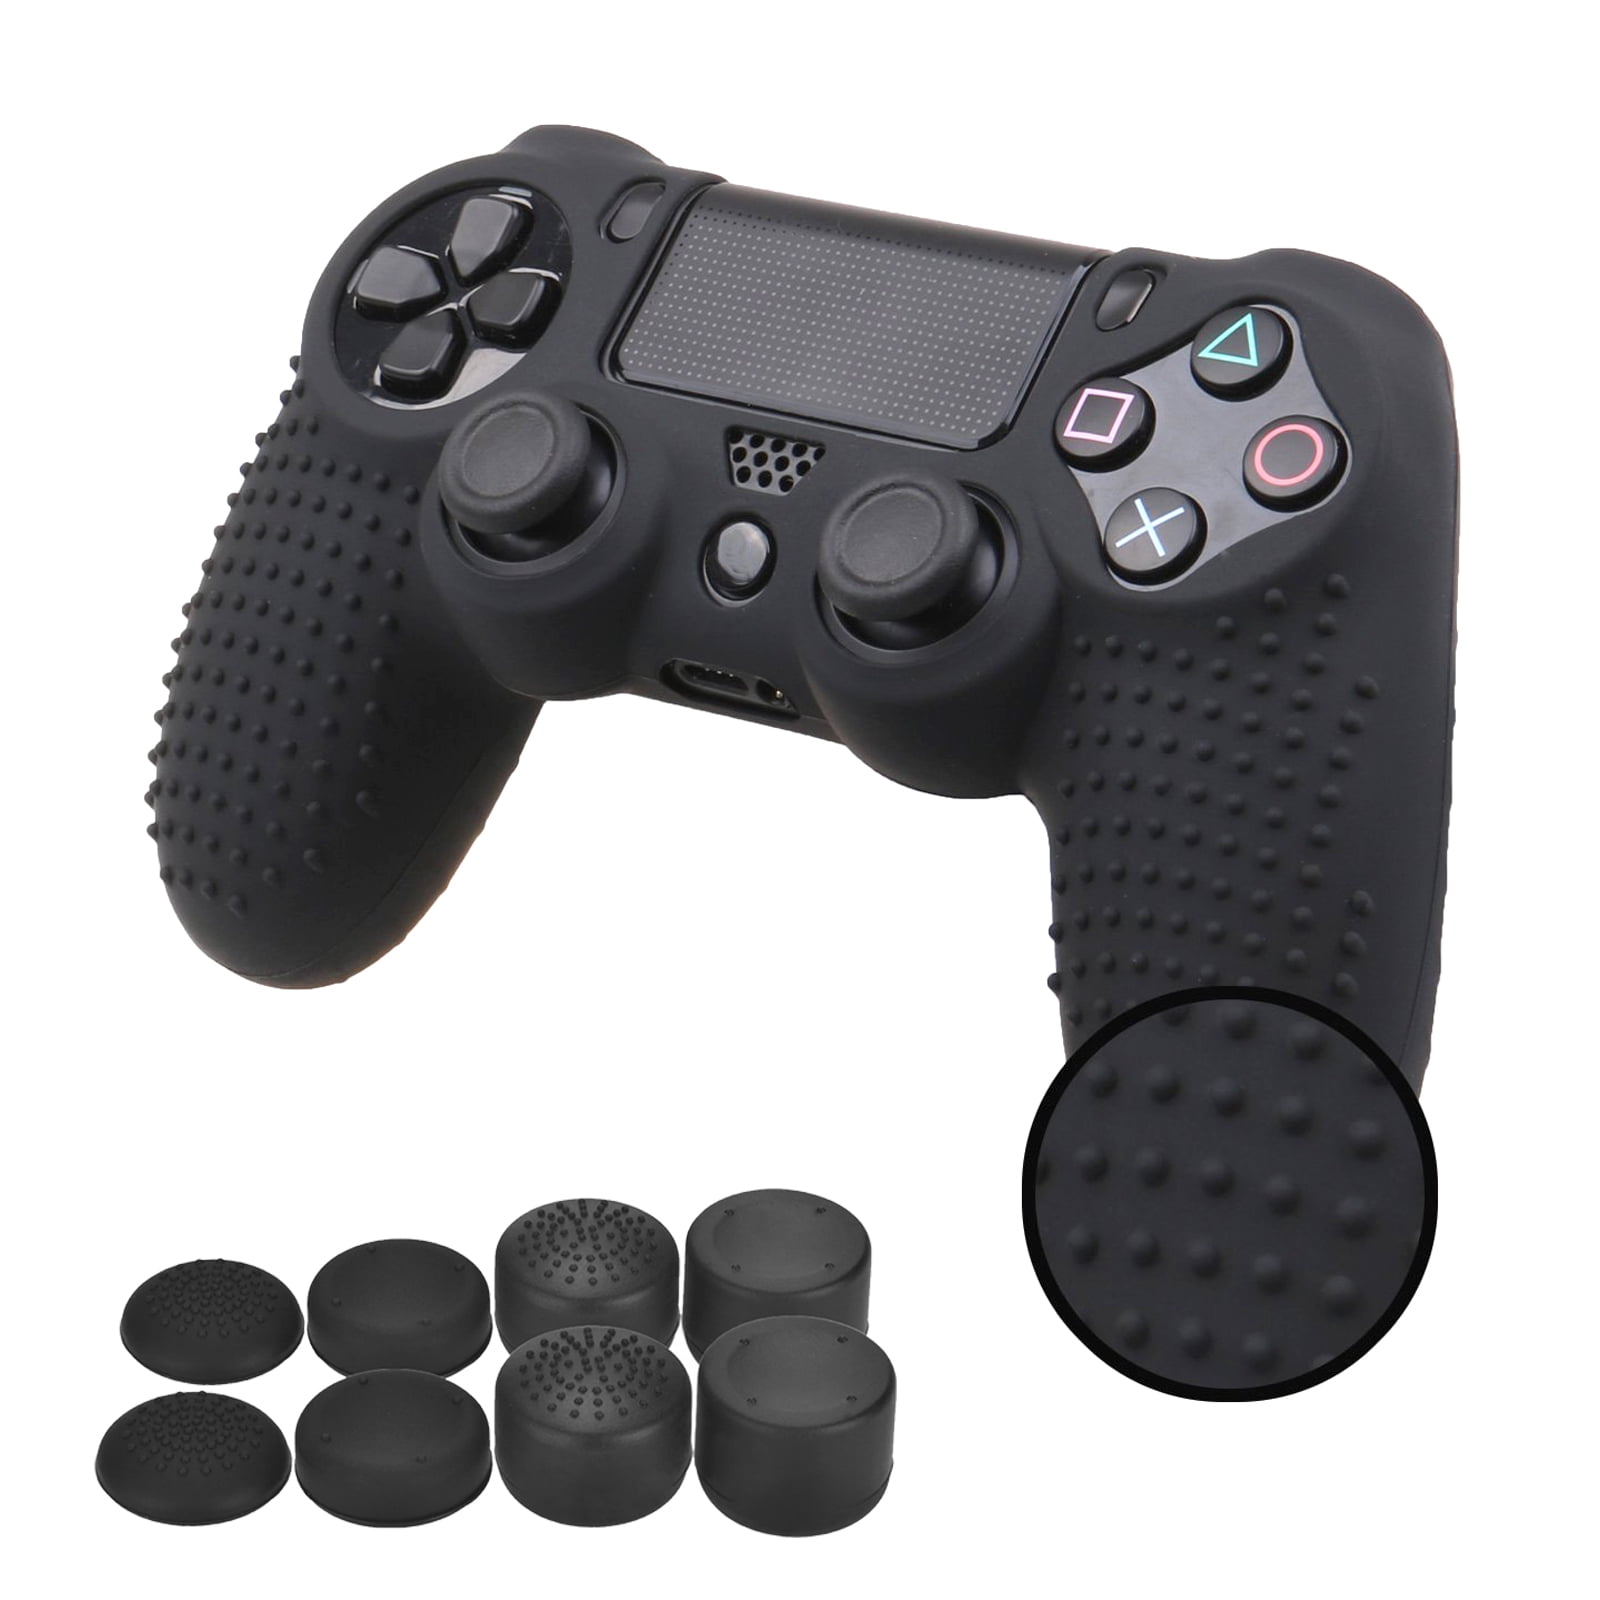 8pcs Pro Thumb Grips-Studs Blue One Light Bar Sticker PS4 Controller Skin,Silicone Grips for Playstation 4 PS4/Slim/Pro Controller Anti Slip Cover Case Protector for Dual Shock 4 Controller